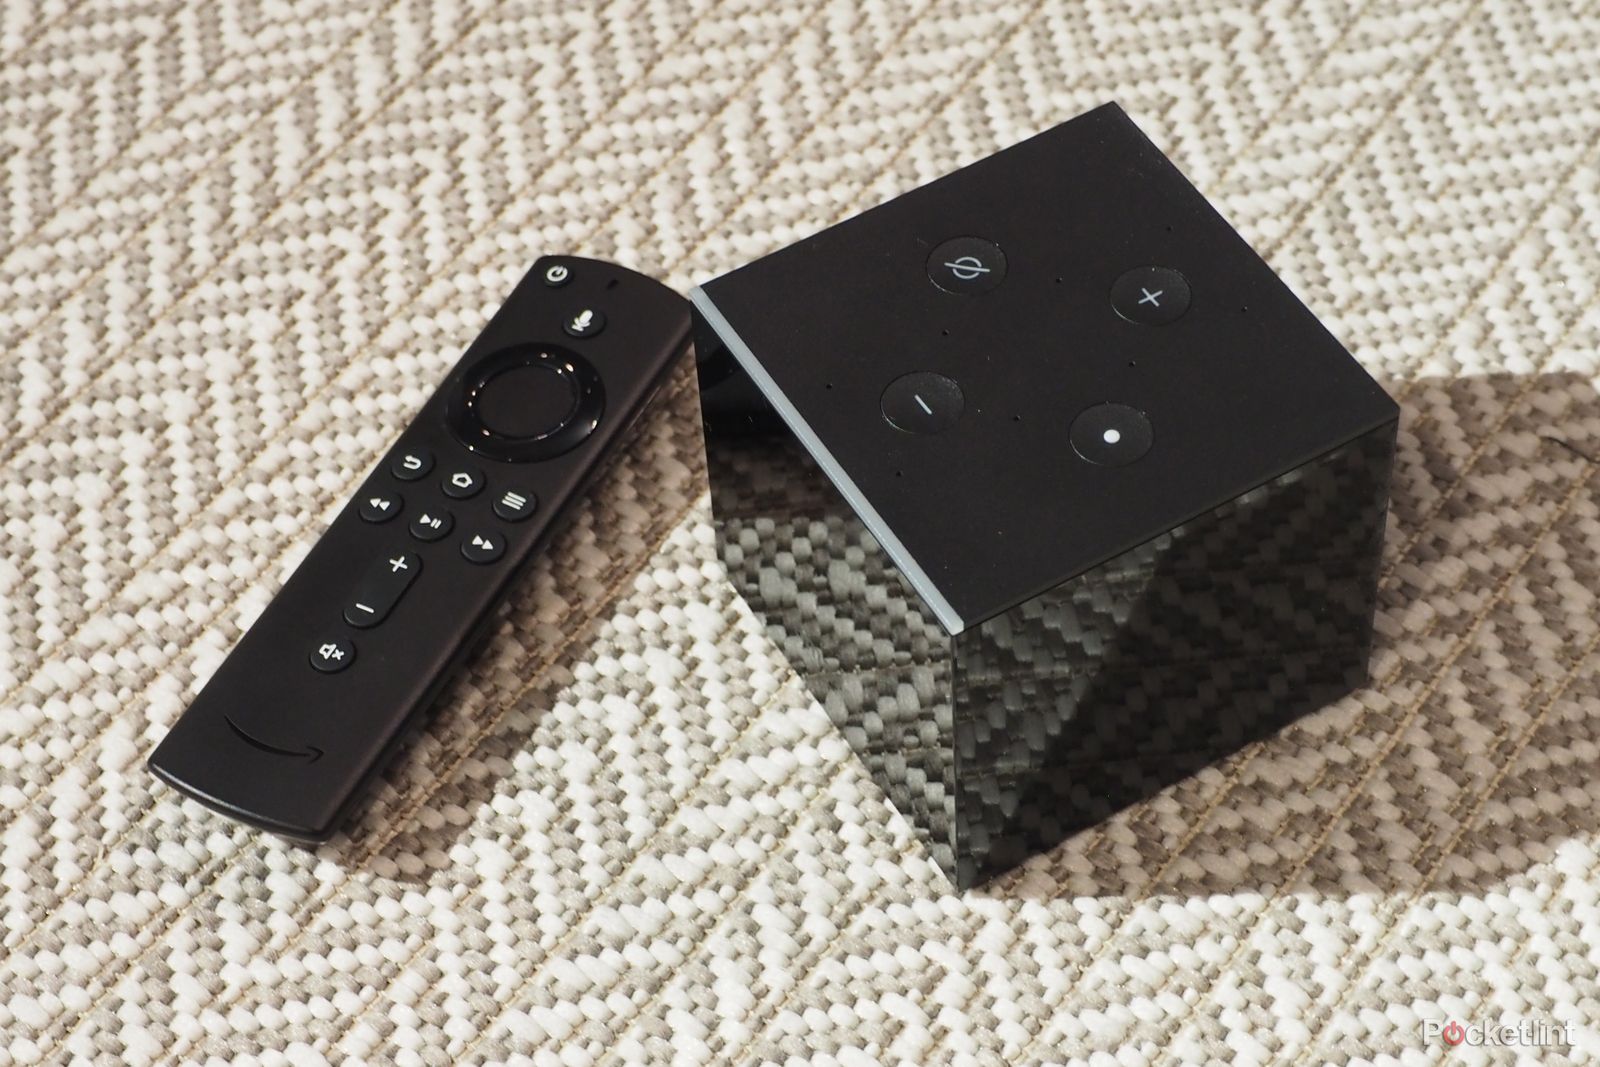 Fire TV Cube image 1